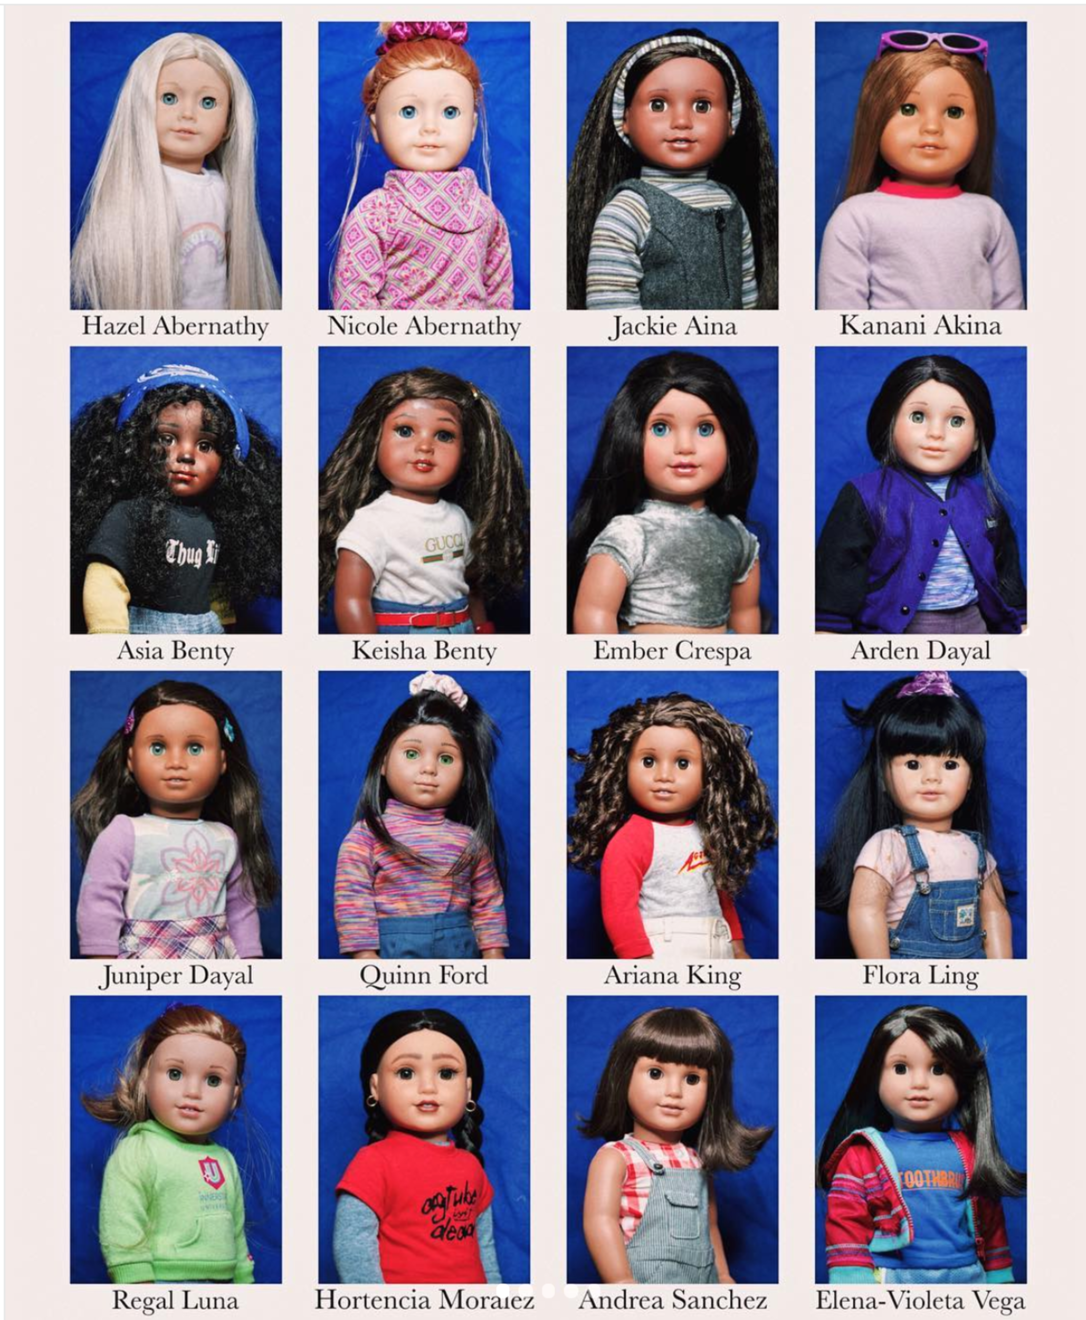 American Girl History and How Its Dolls Have Changed Through the Years